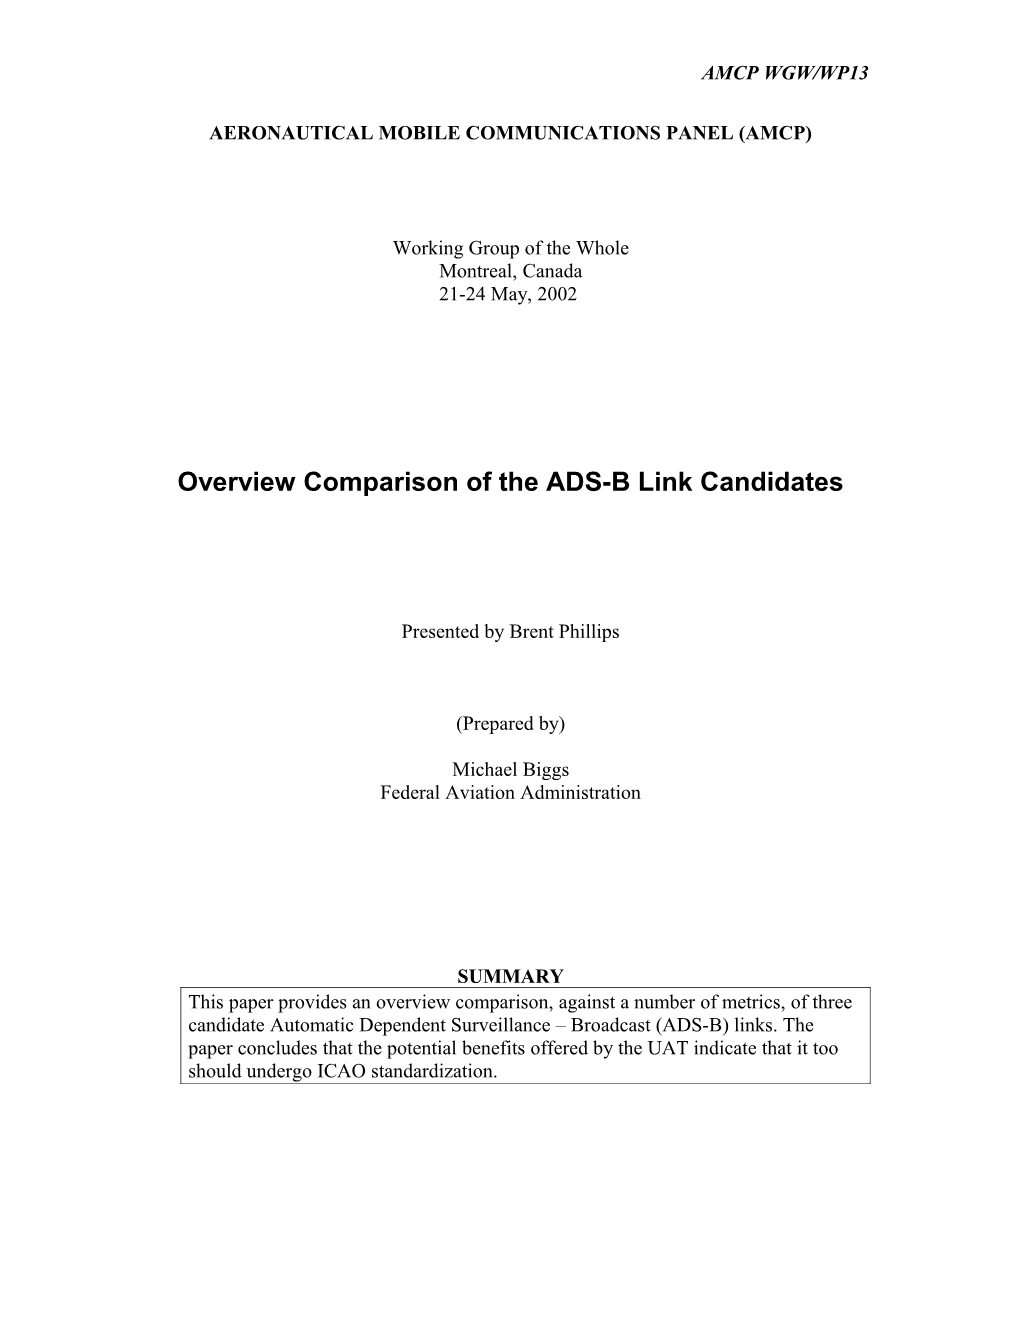 Overview Comparison of the ADS-B Link Candidates